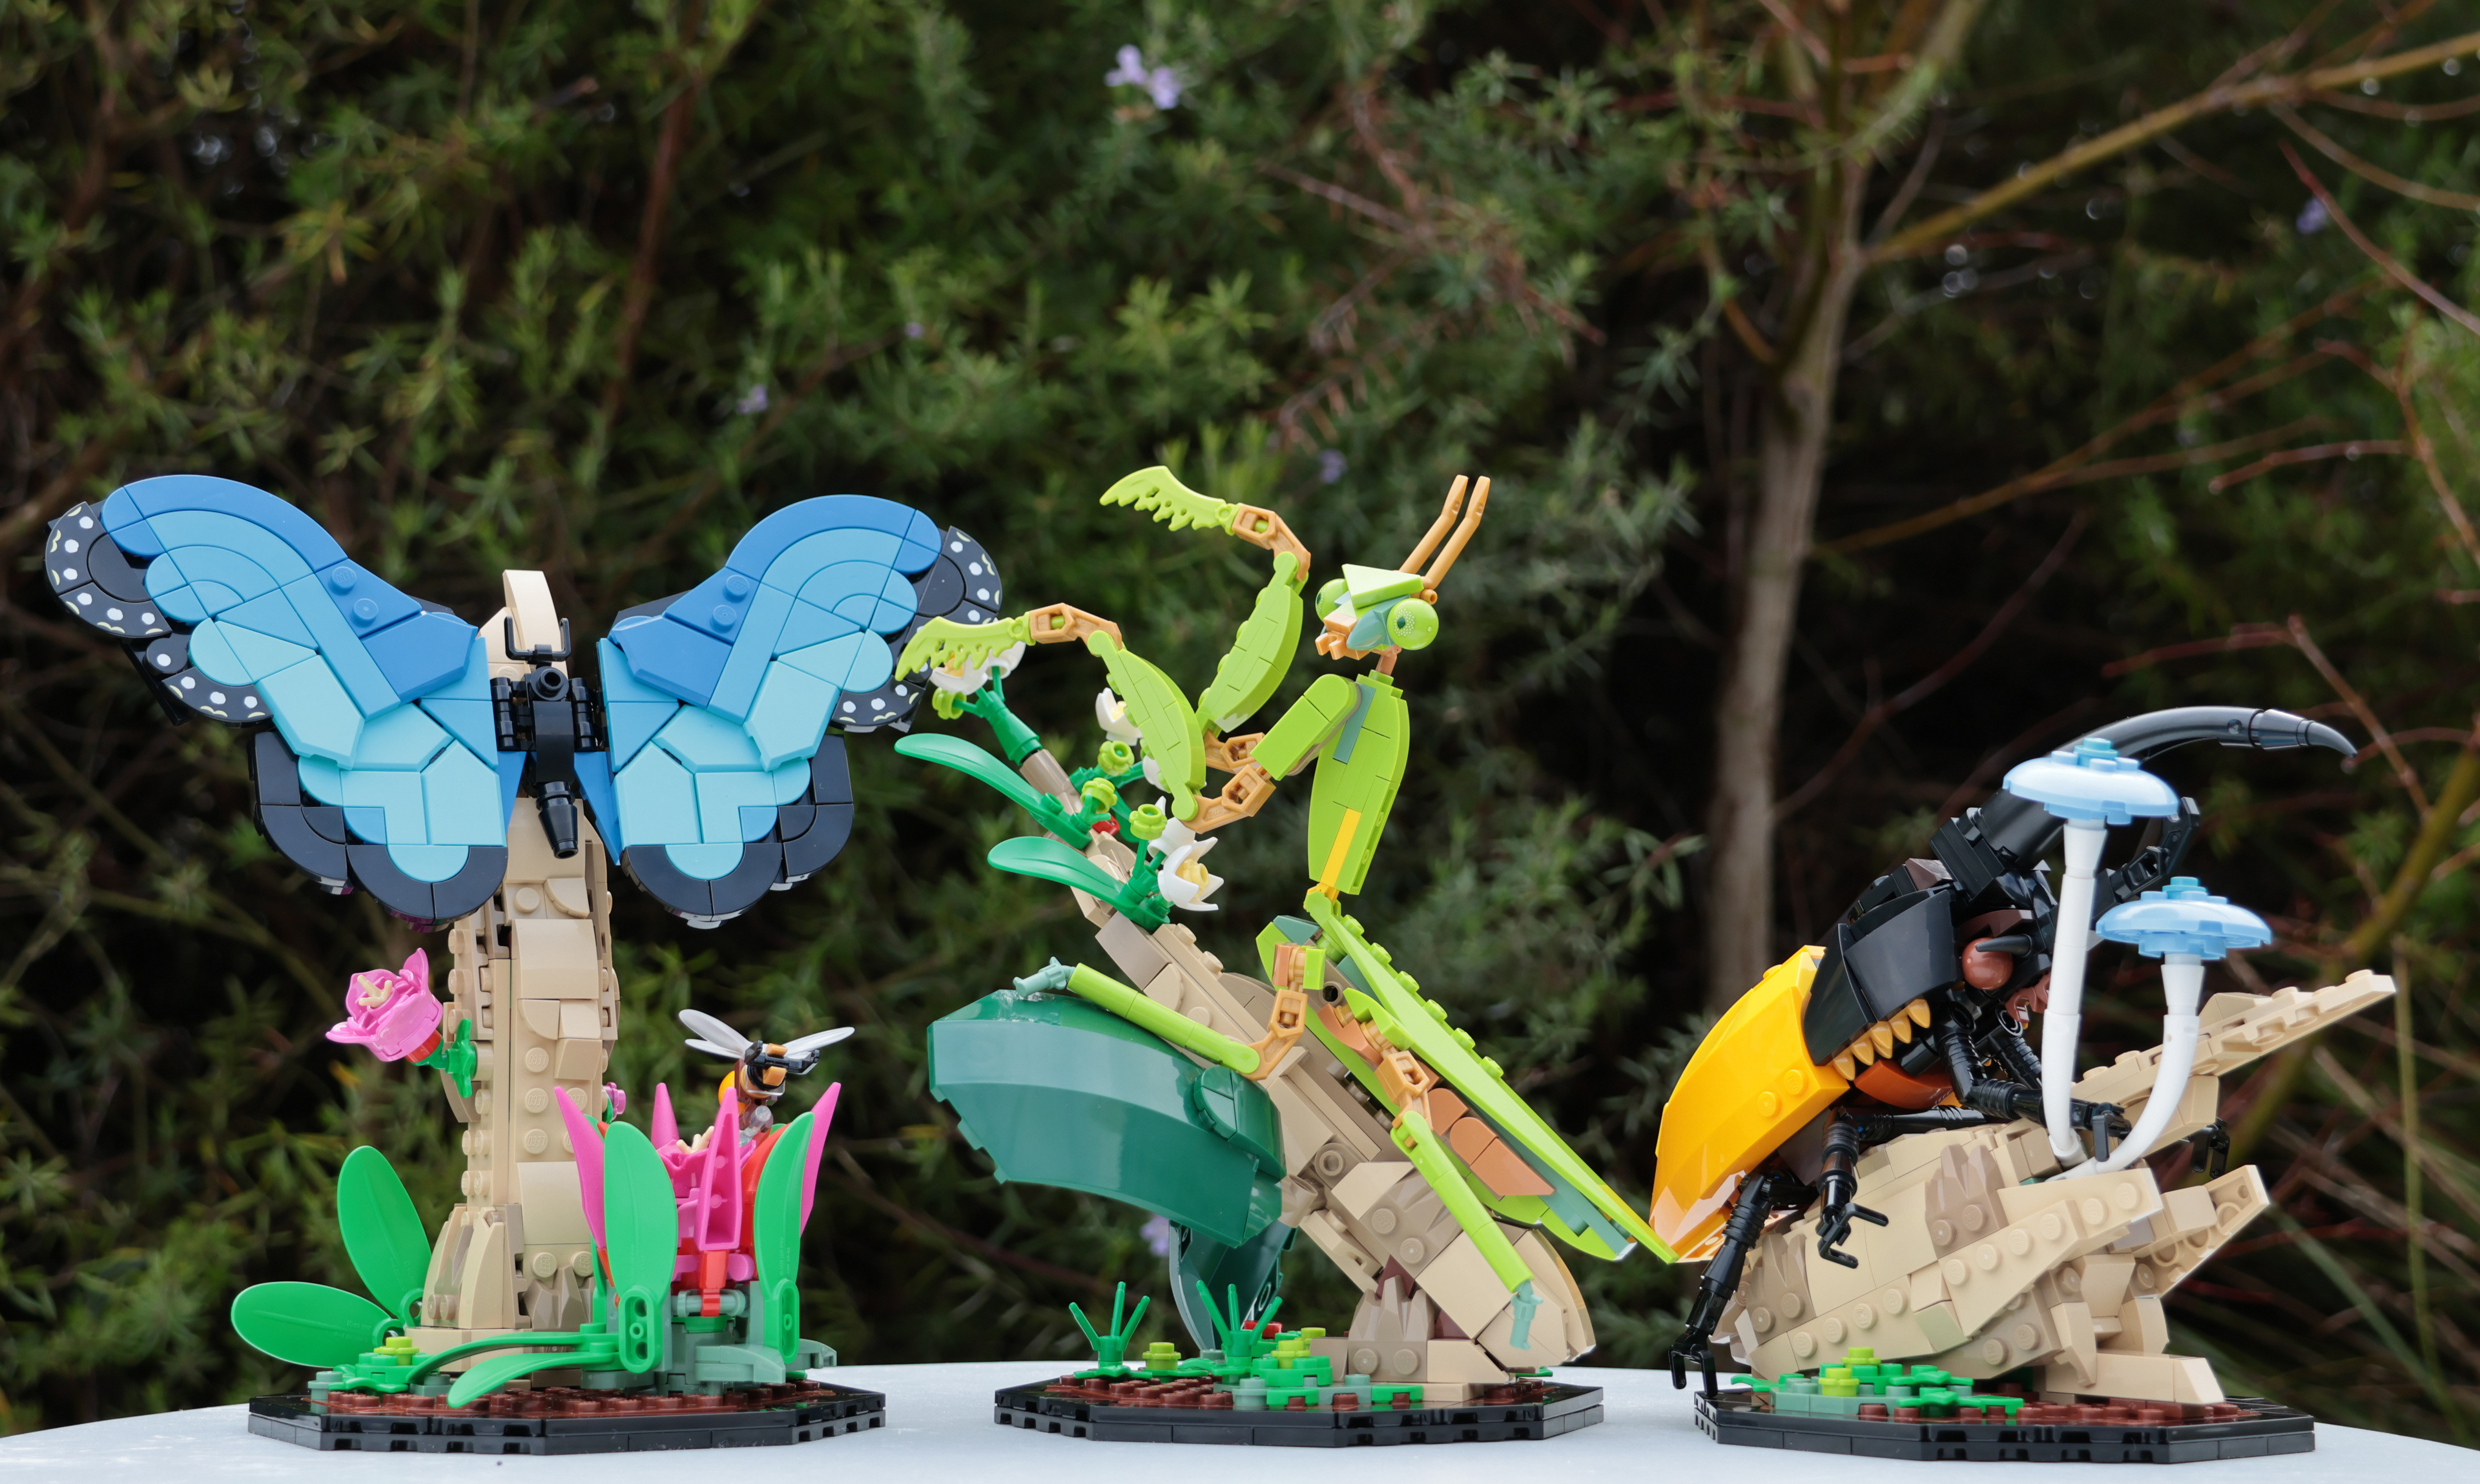 Build LEGO Bugs with 21342 The Insect Collection! - Jay's Brick Blog